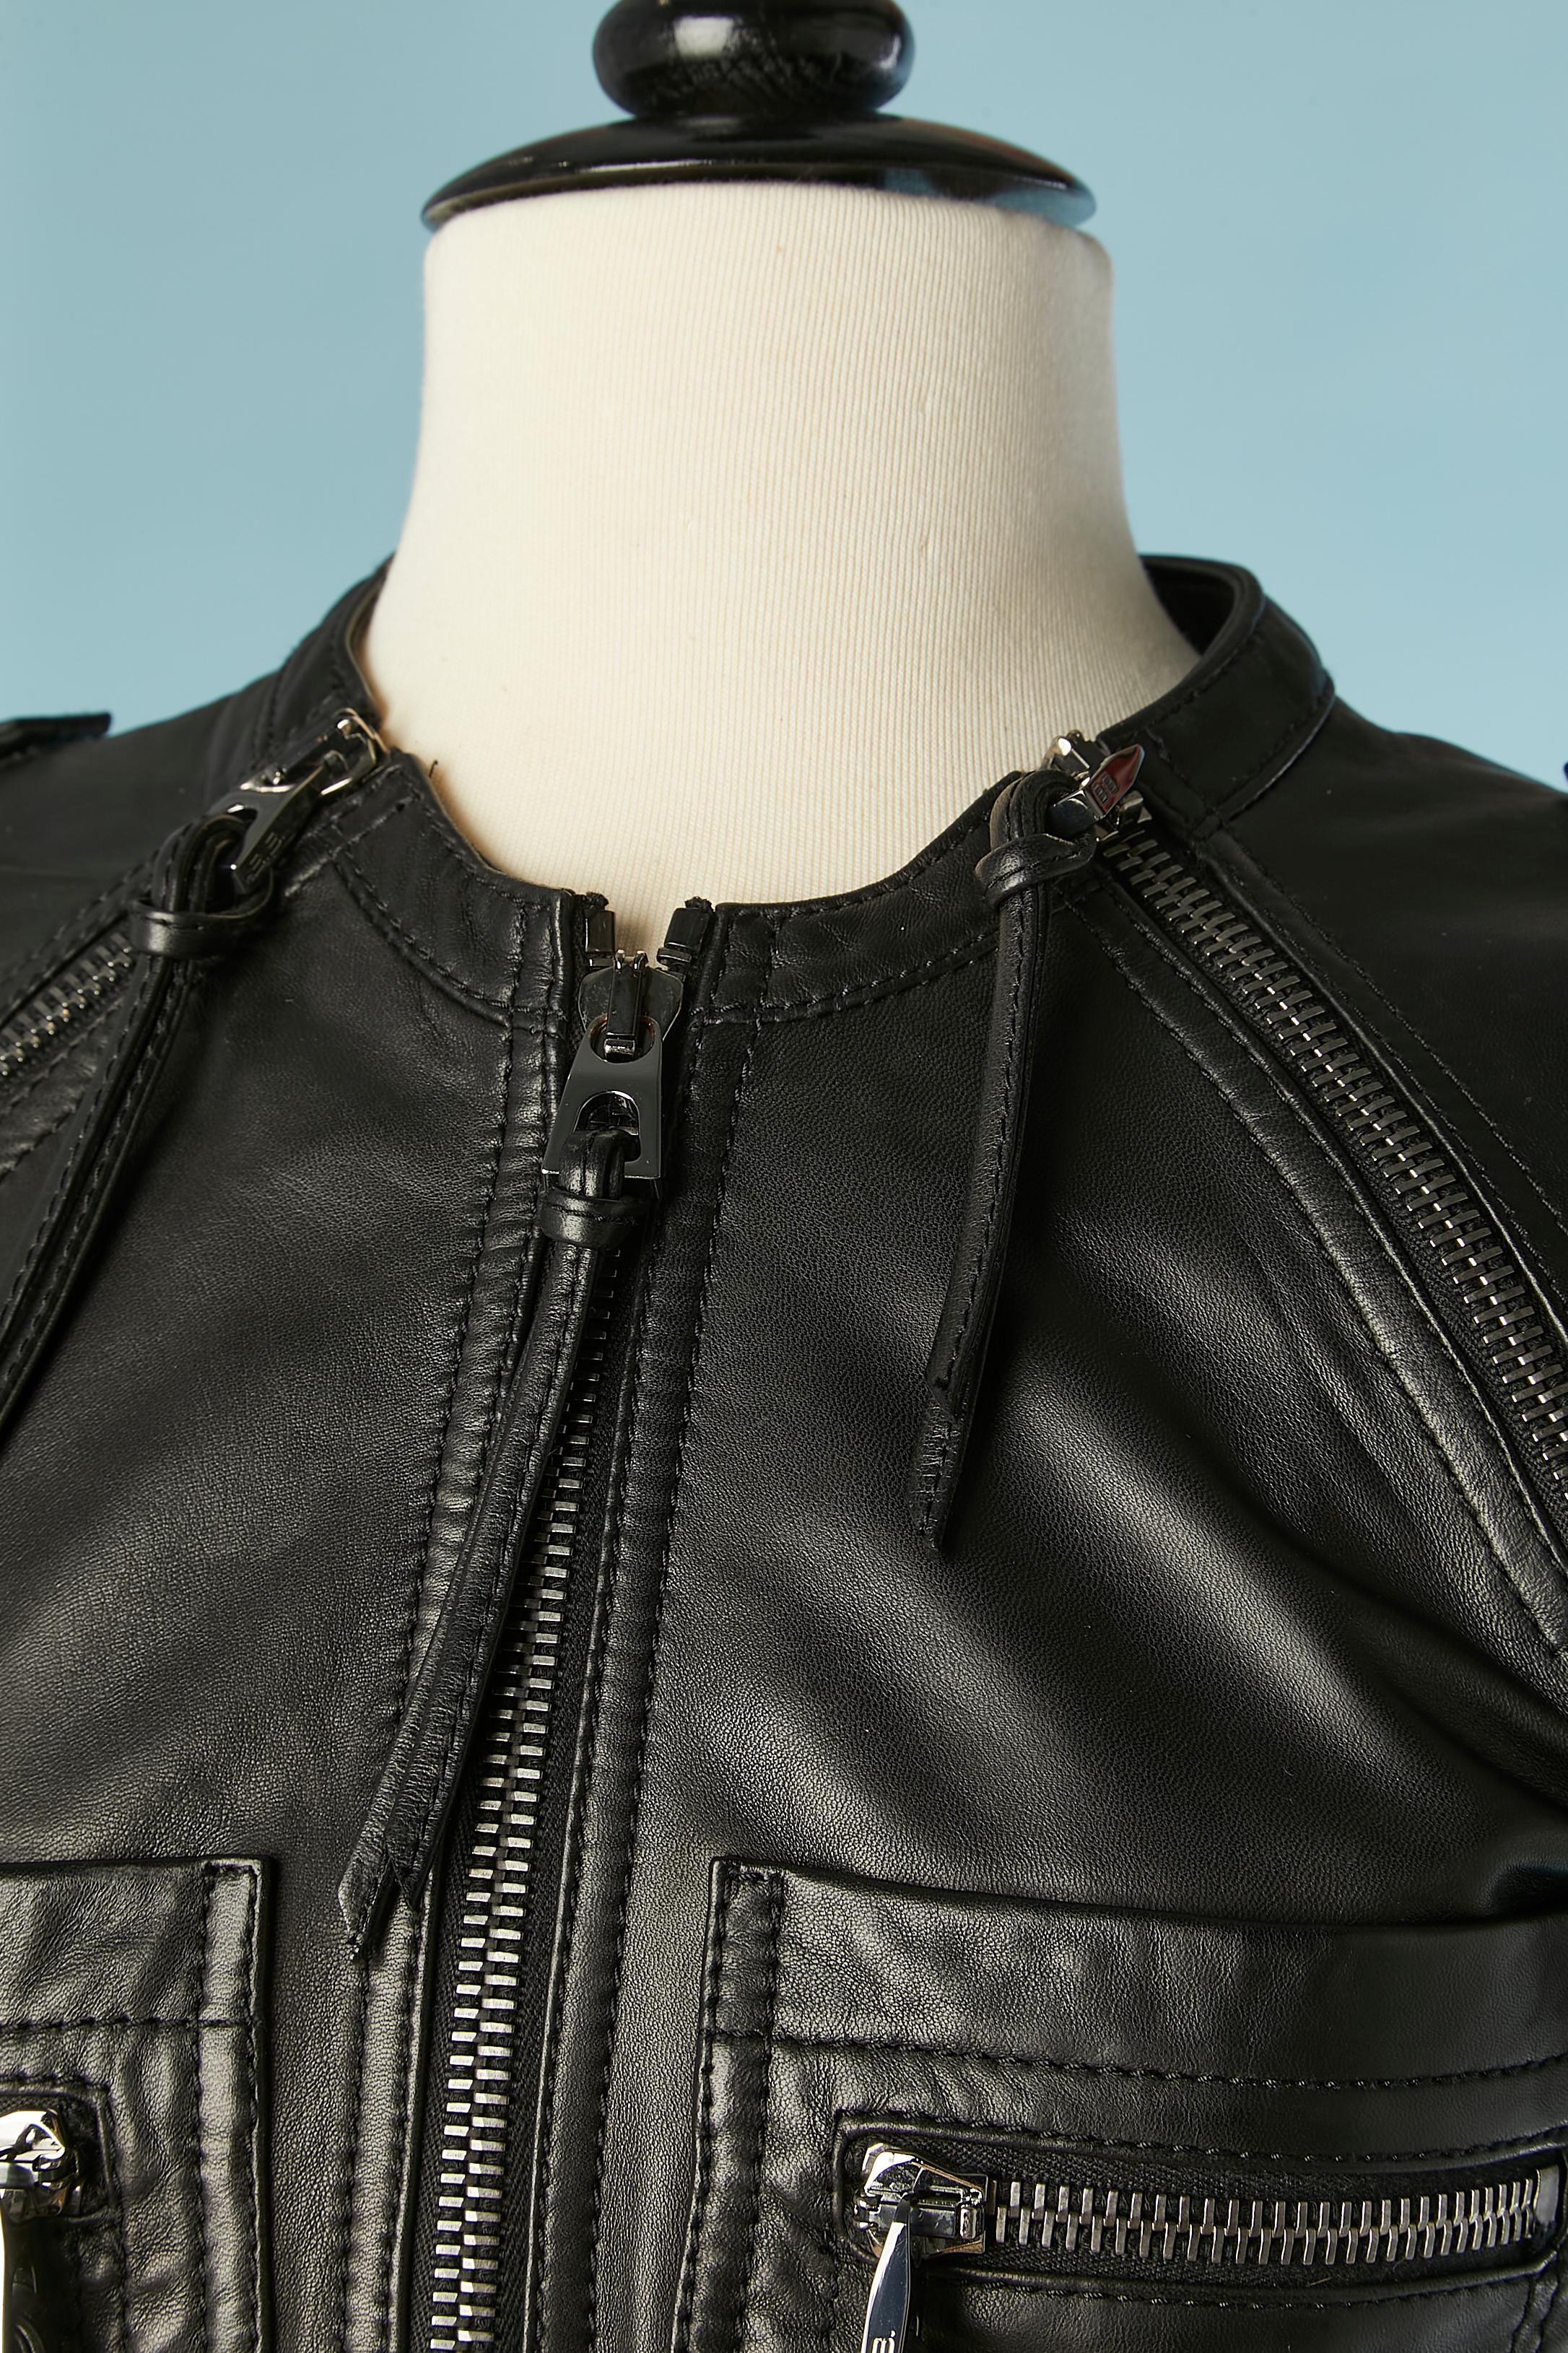 Black leather dress with zip in the middle front and pockets . Branded snap.
Lining : 50% acetate and 50% rayon 
SIZE 36